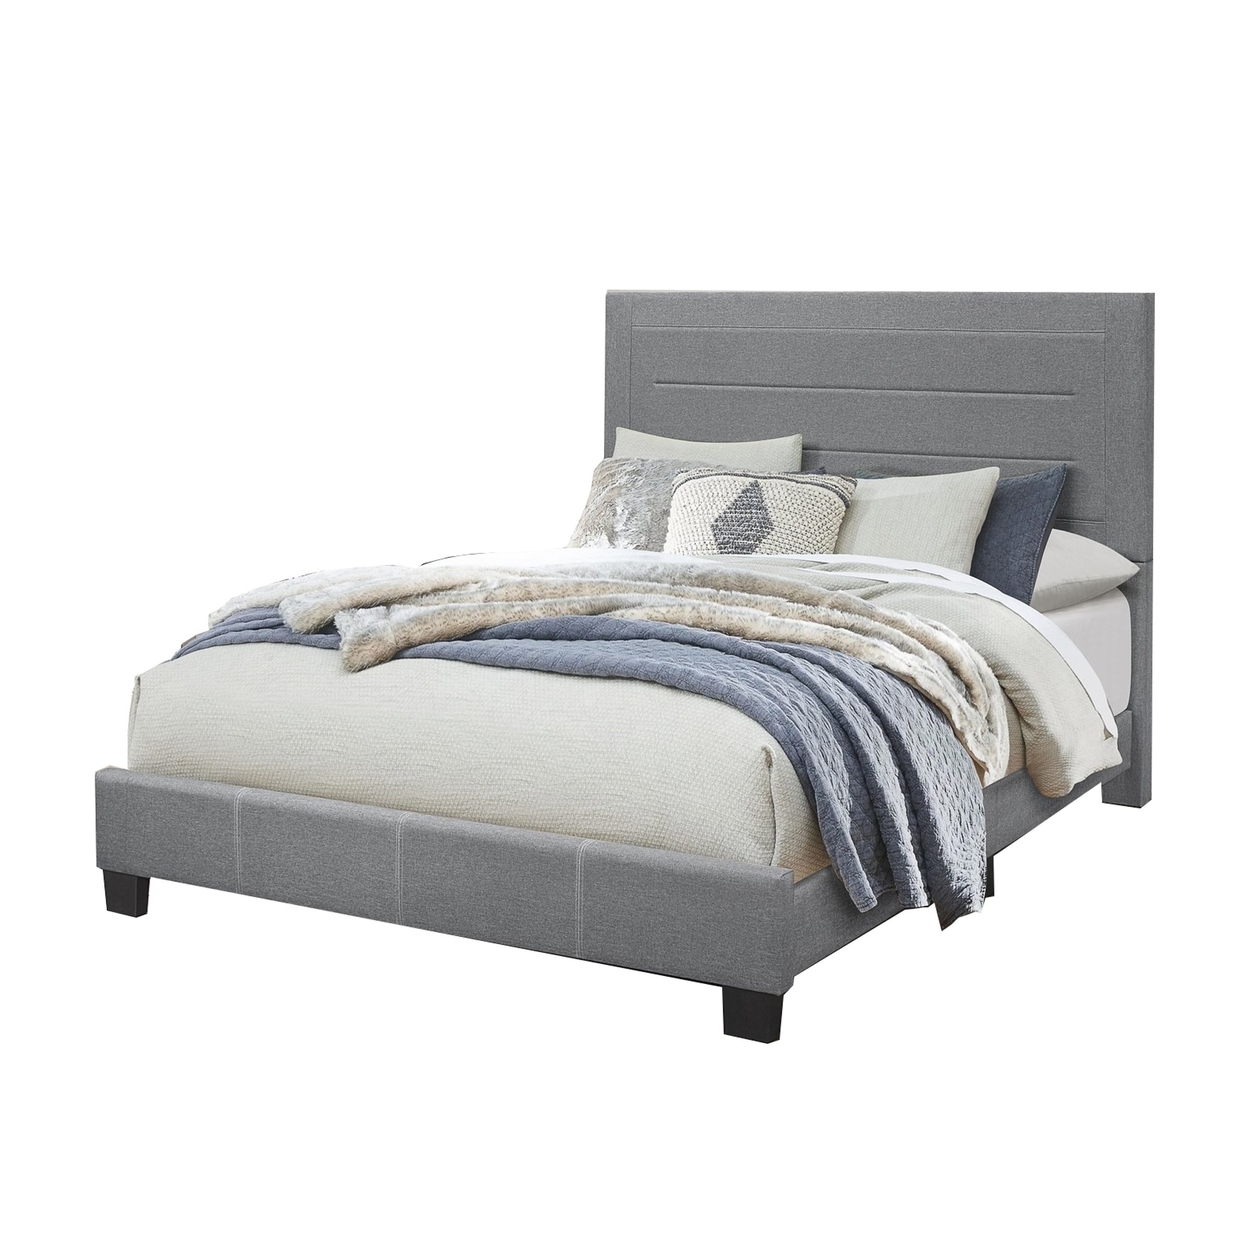 Queen Size Bed With Fabric Wrapped Frame And Panel Headboard, Gray- Saltoro Sherpi